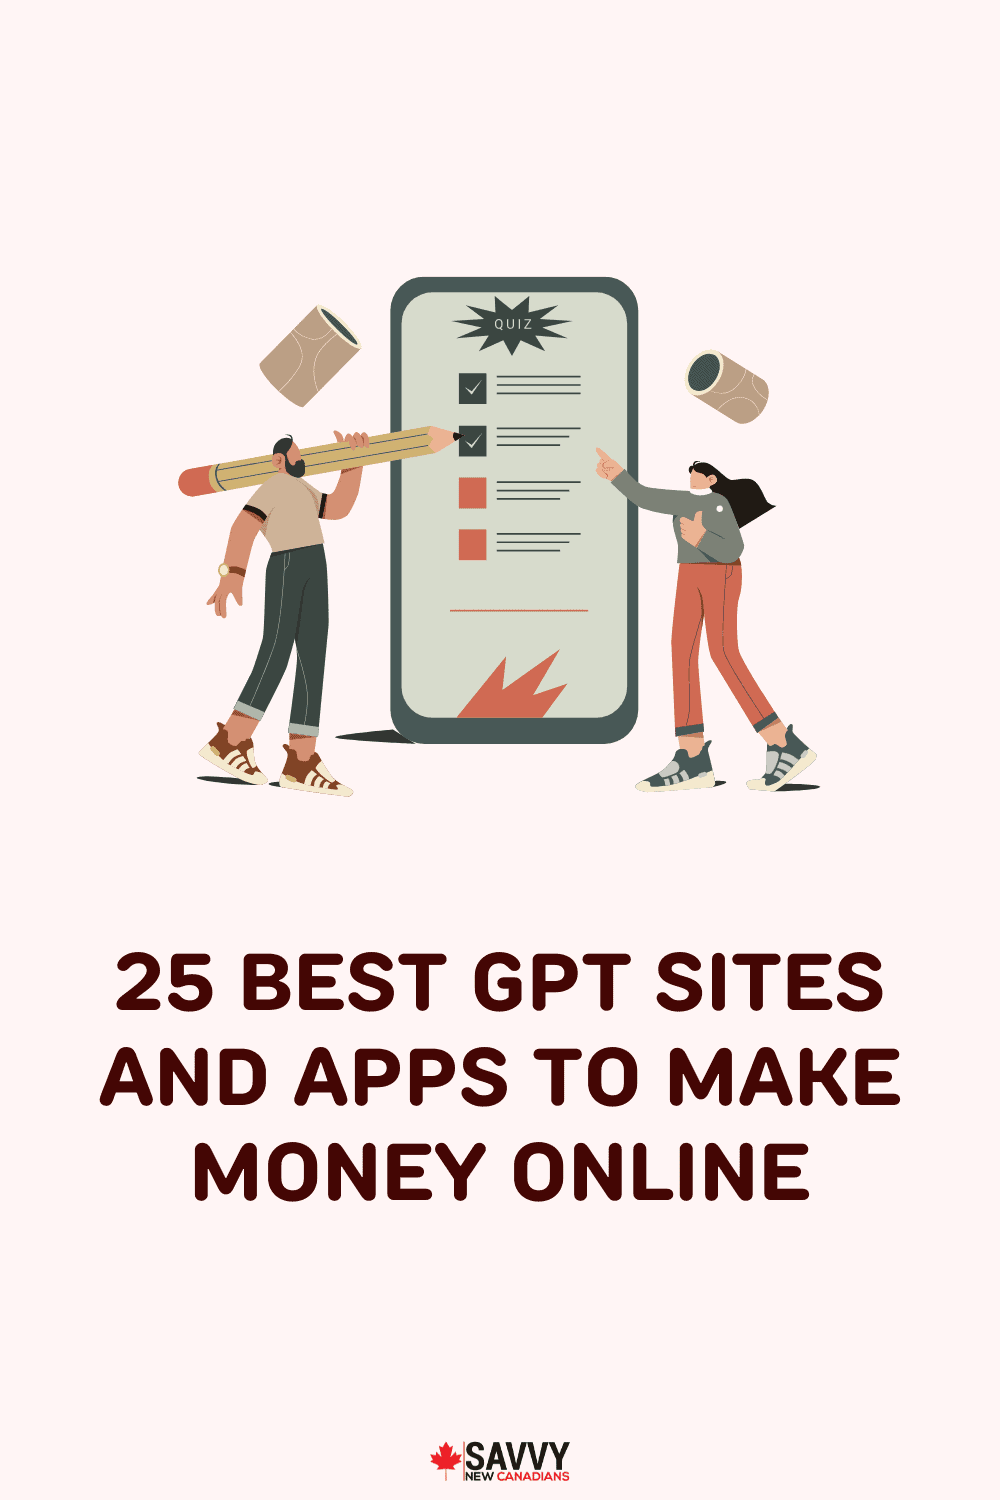 25 Best GPT Sites and Apps To Make Money Online in 2022